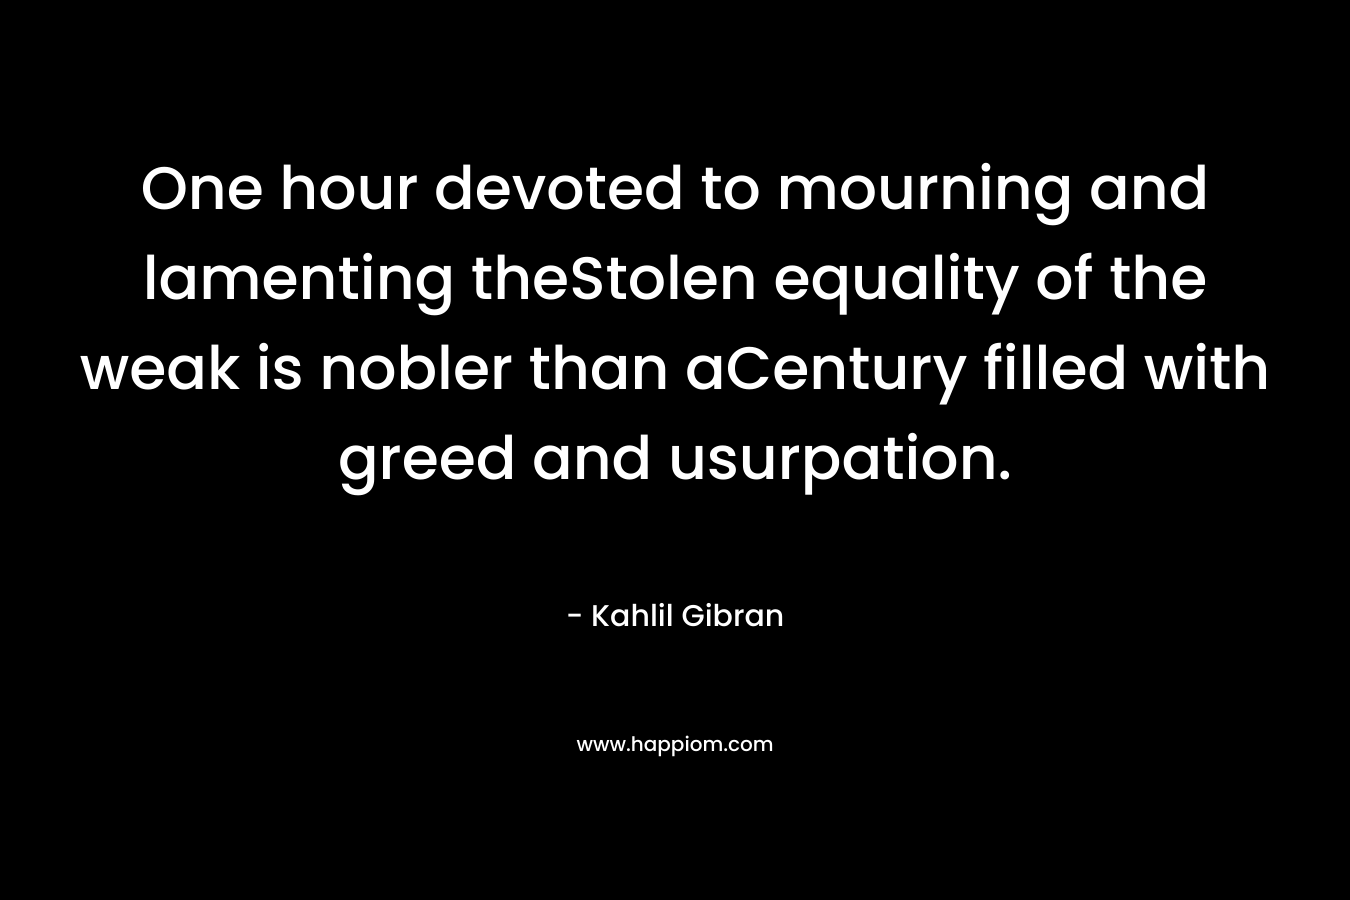 One hour devoted to mourning and lamenting theStolen equality of the weak is nobler than aCentury filled with greed and usurpation.